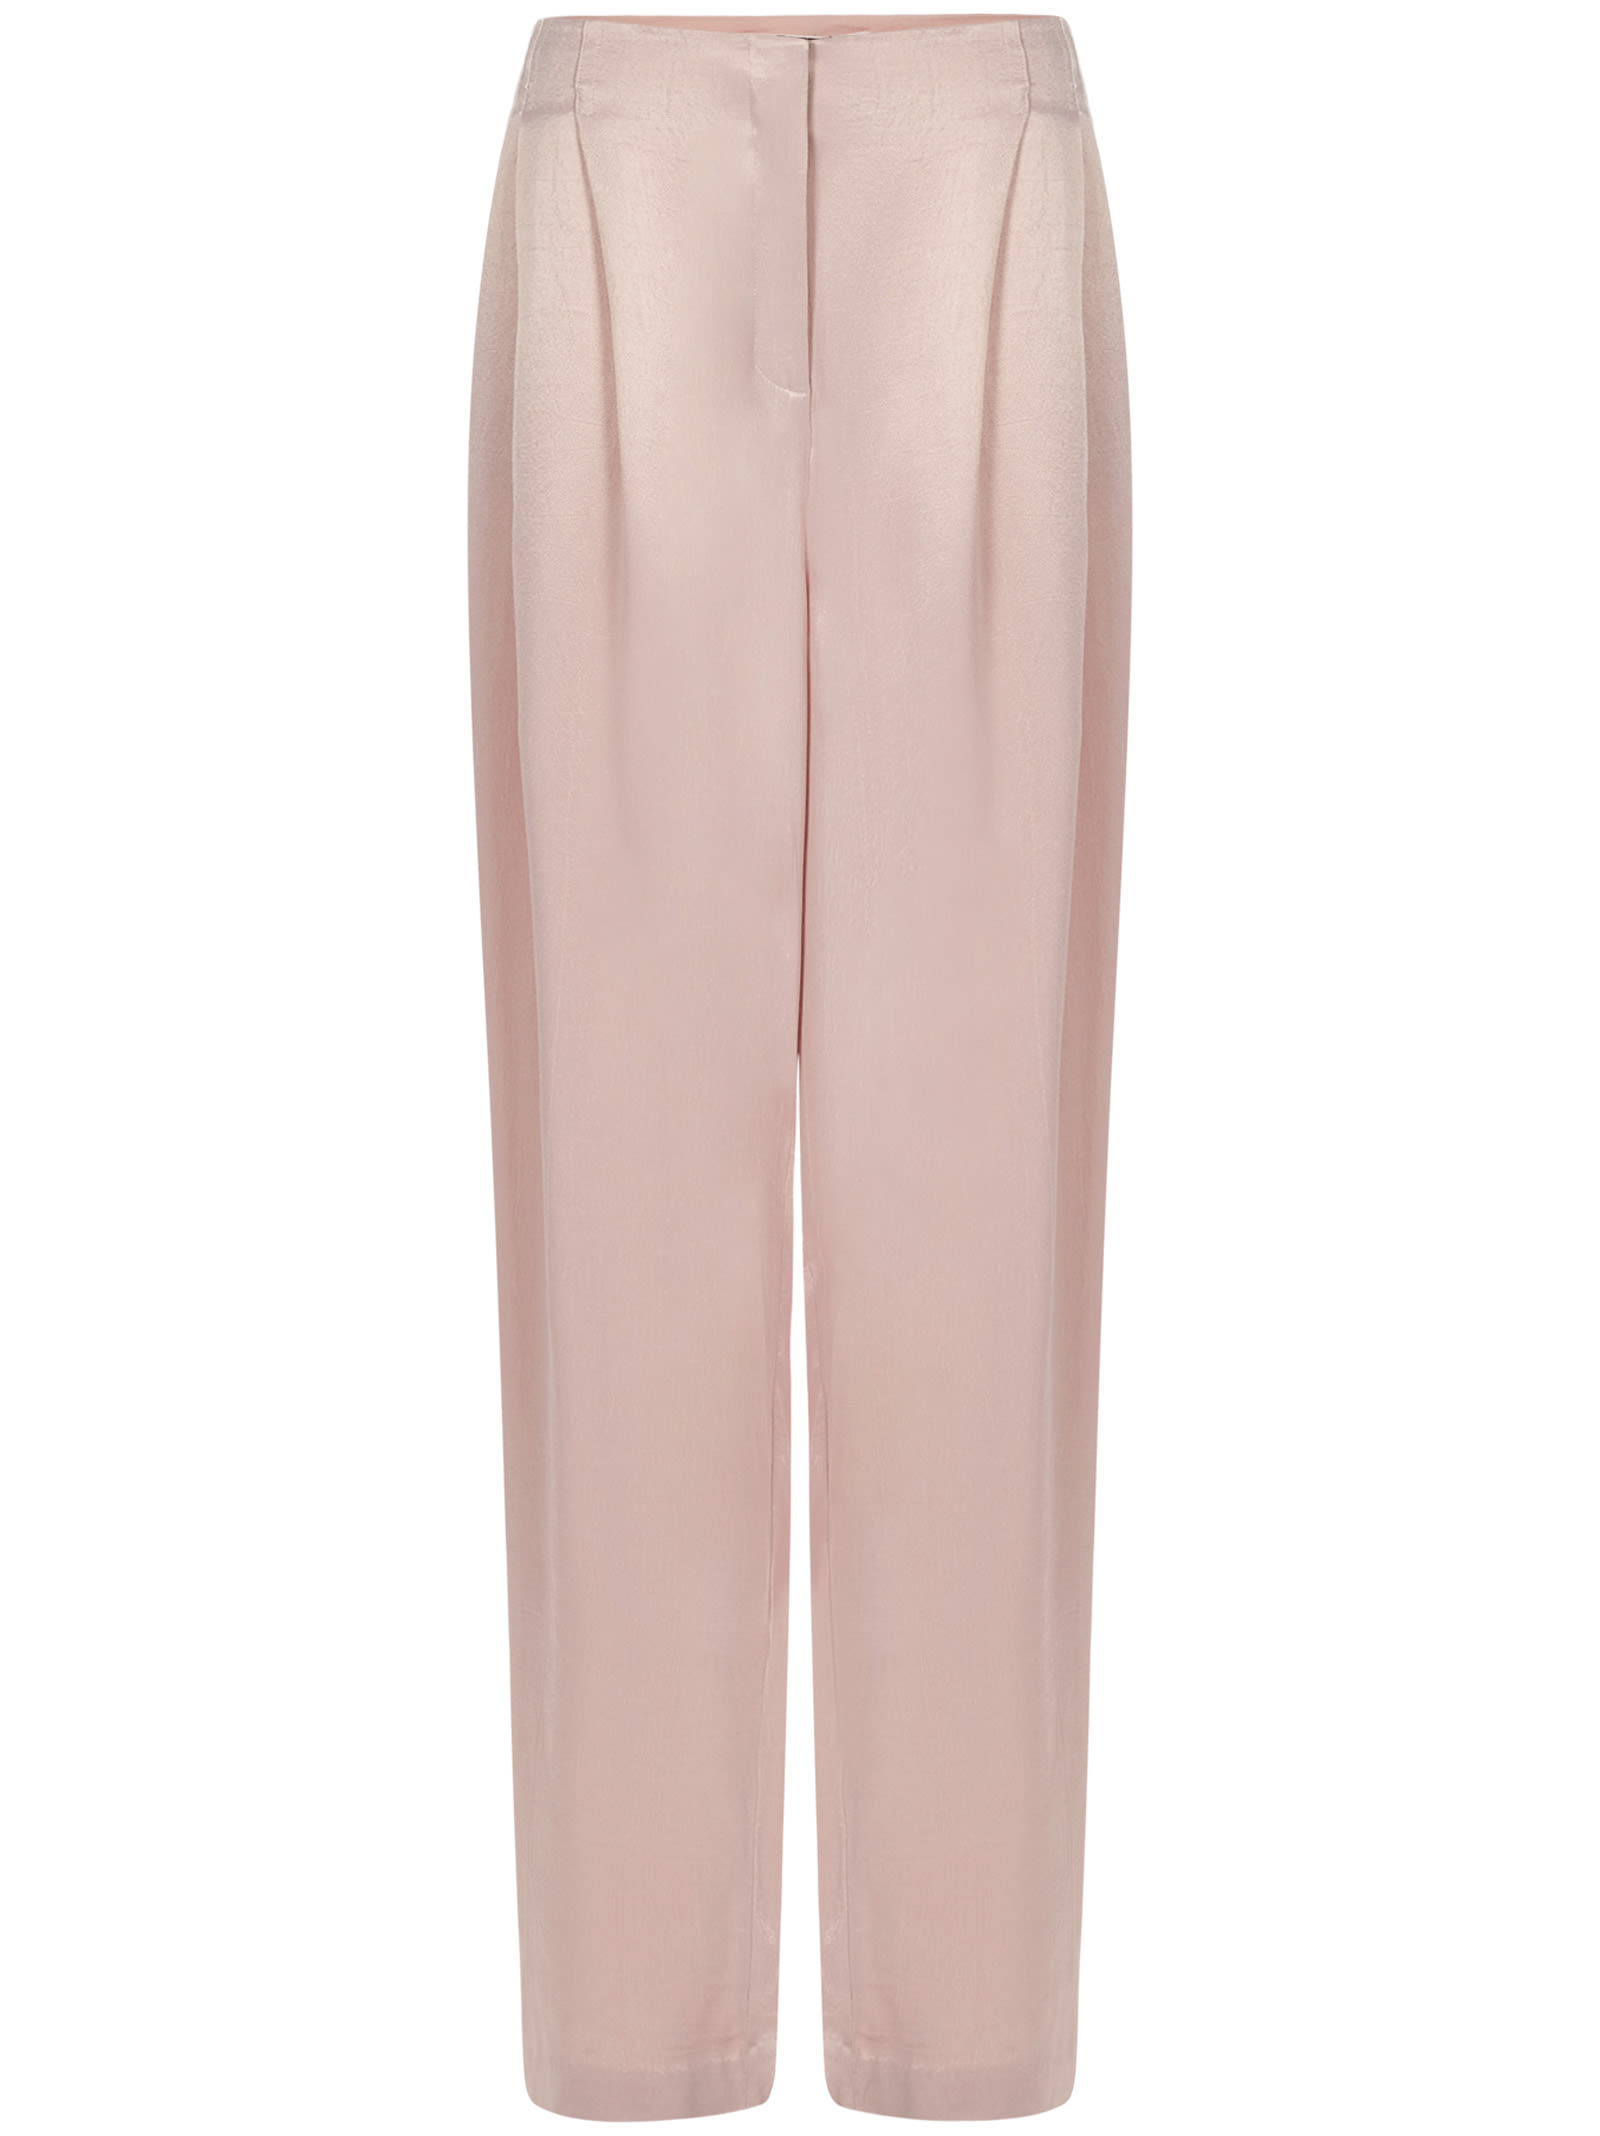 Rotate by Birger Christensen Rotate Trousers